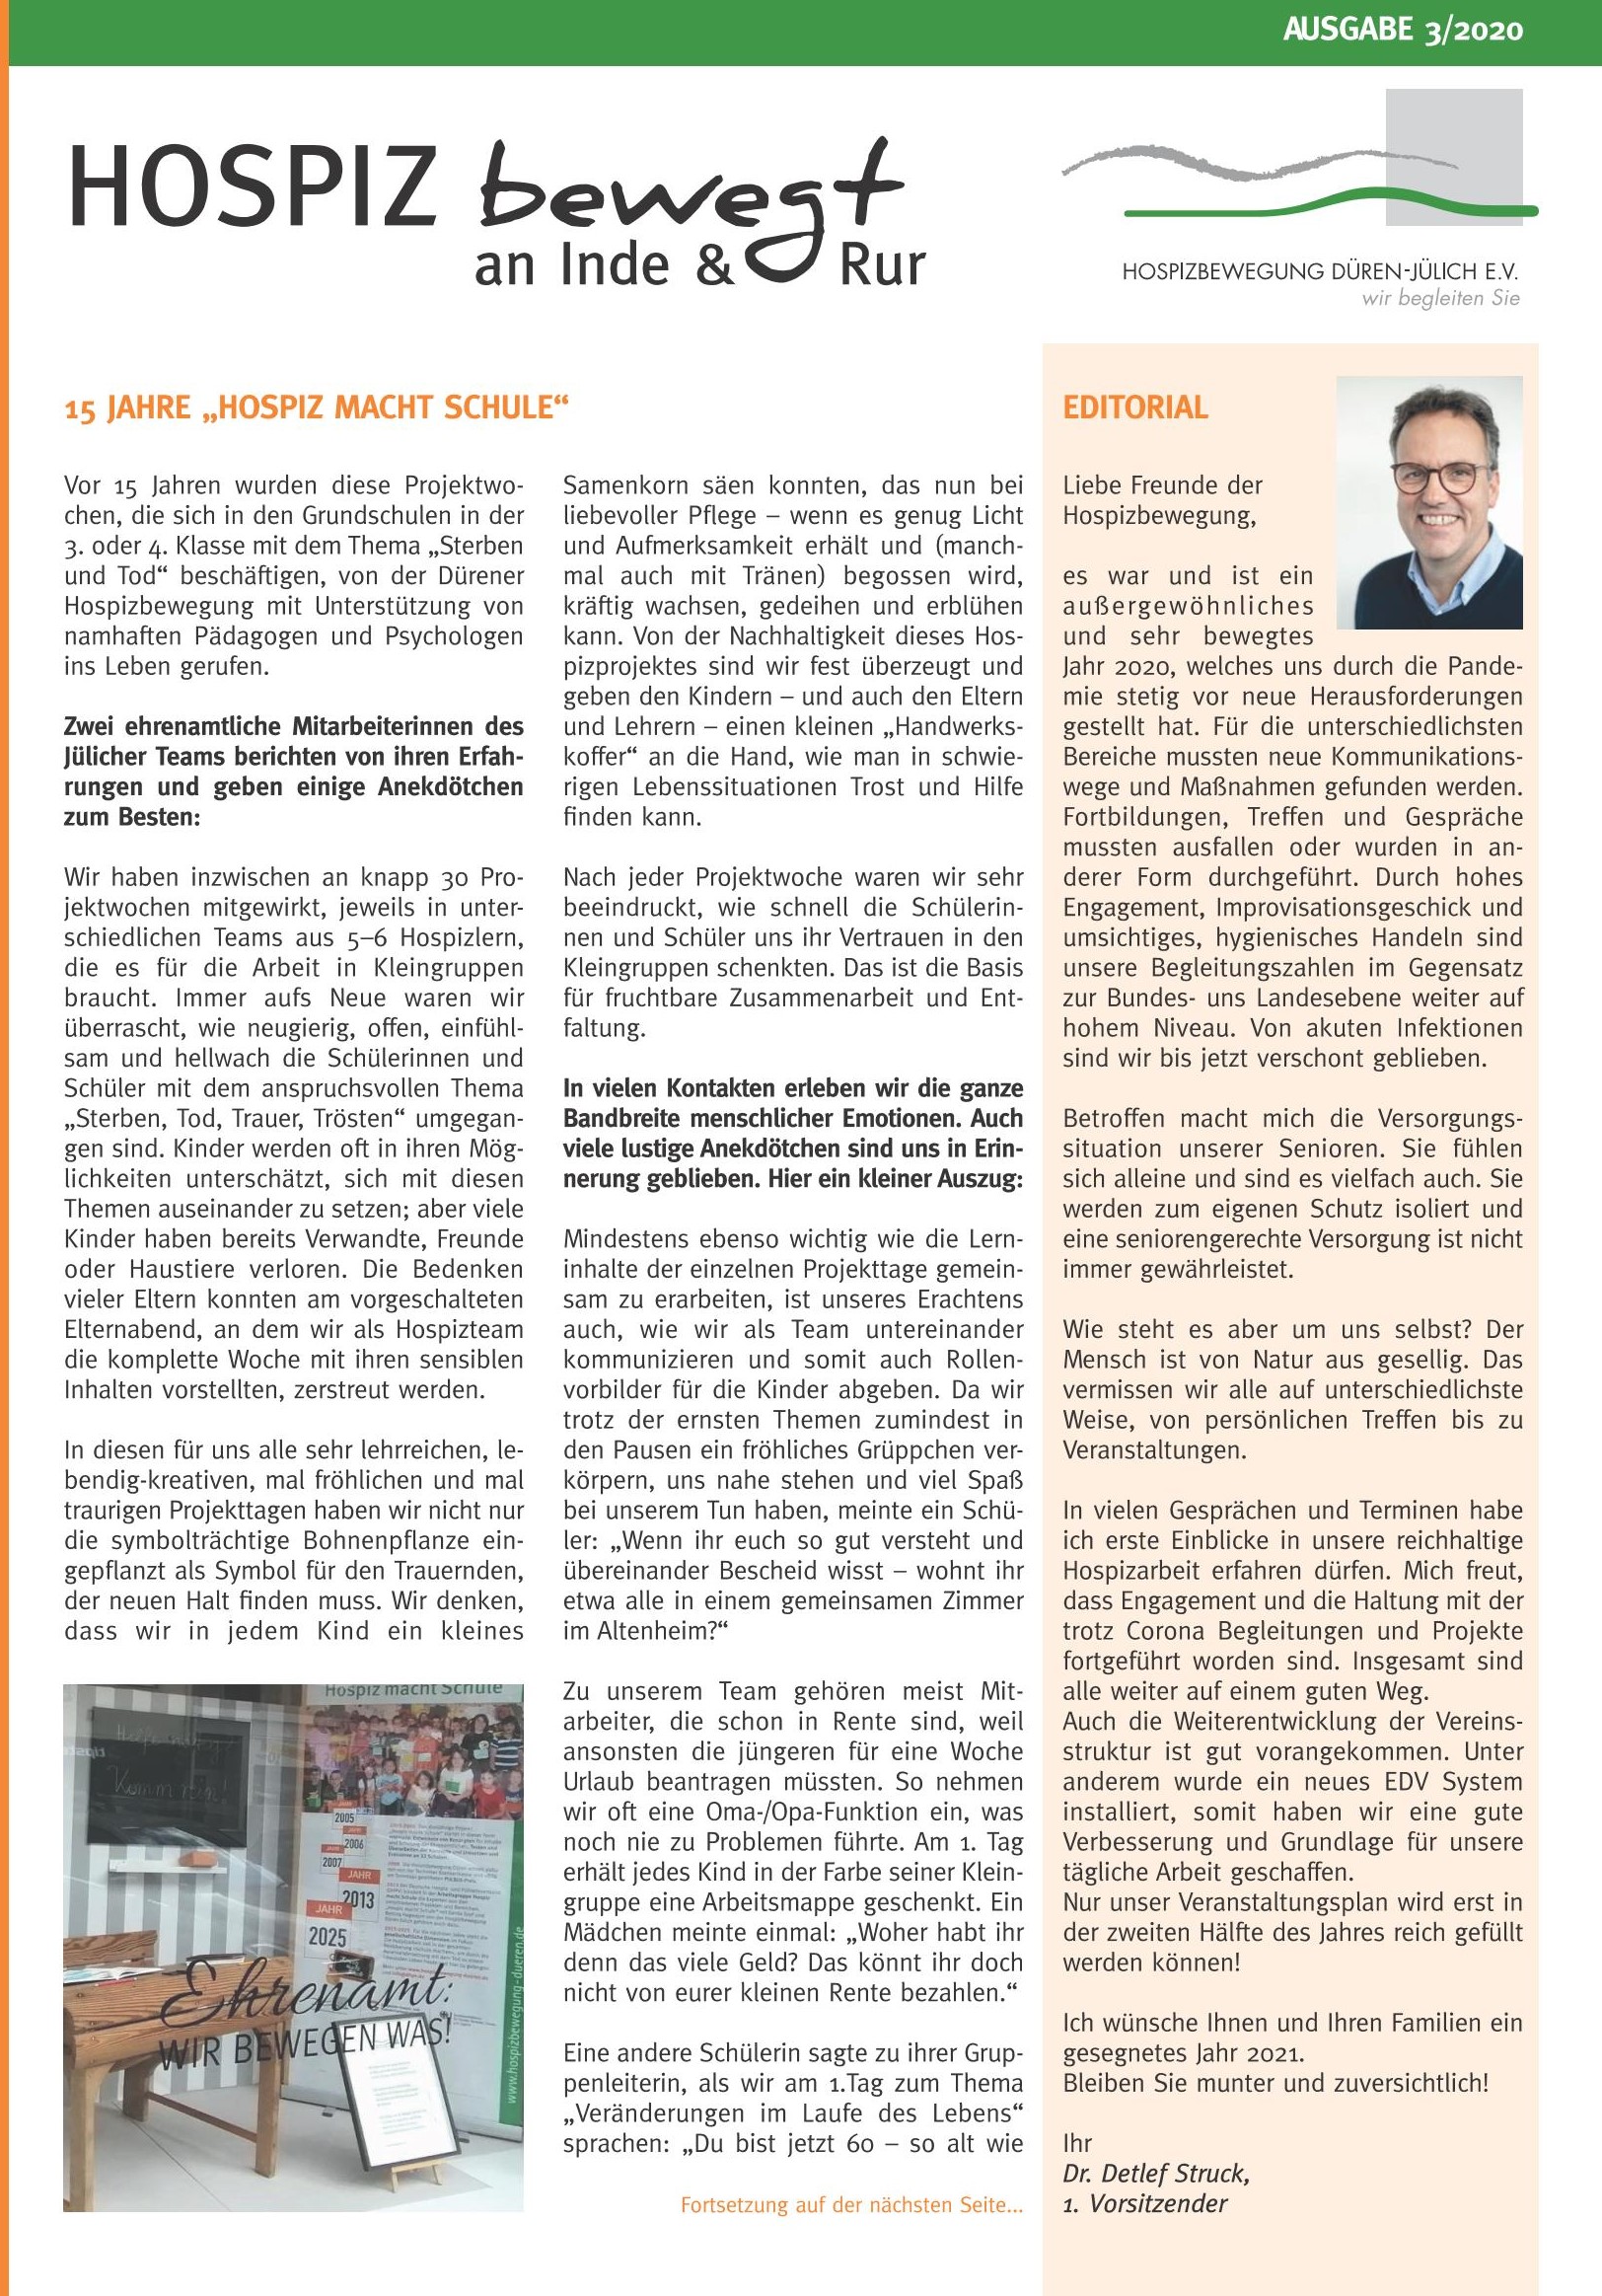 Hospizbrief Dezember 2020 Page 1A